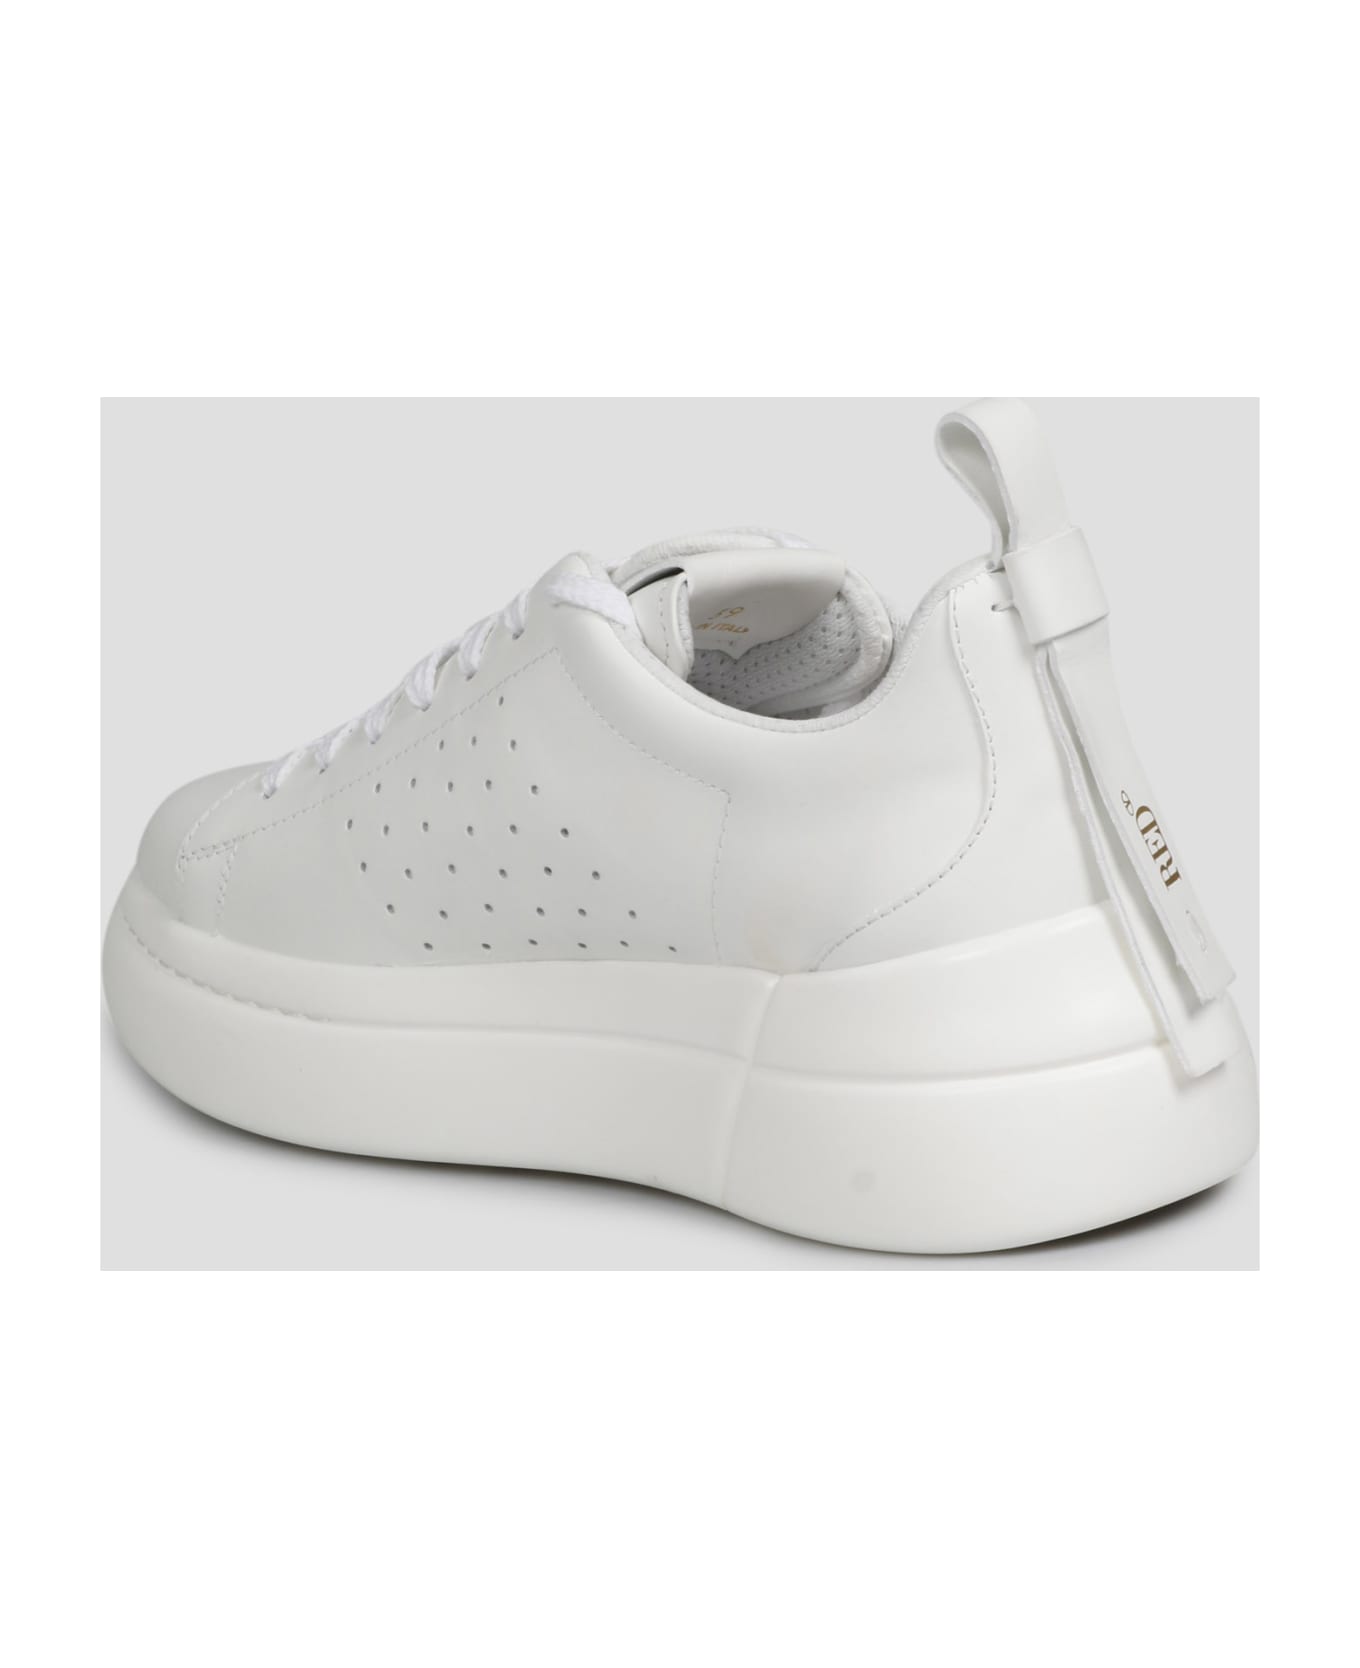 RED Valentino Bowalk Sneakers - White